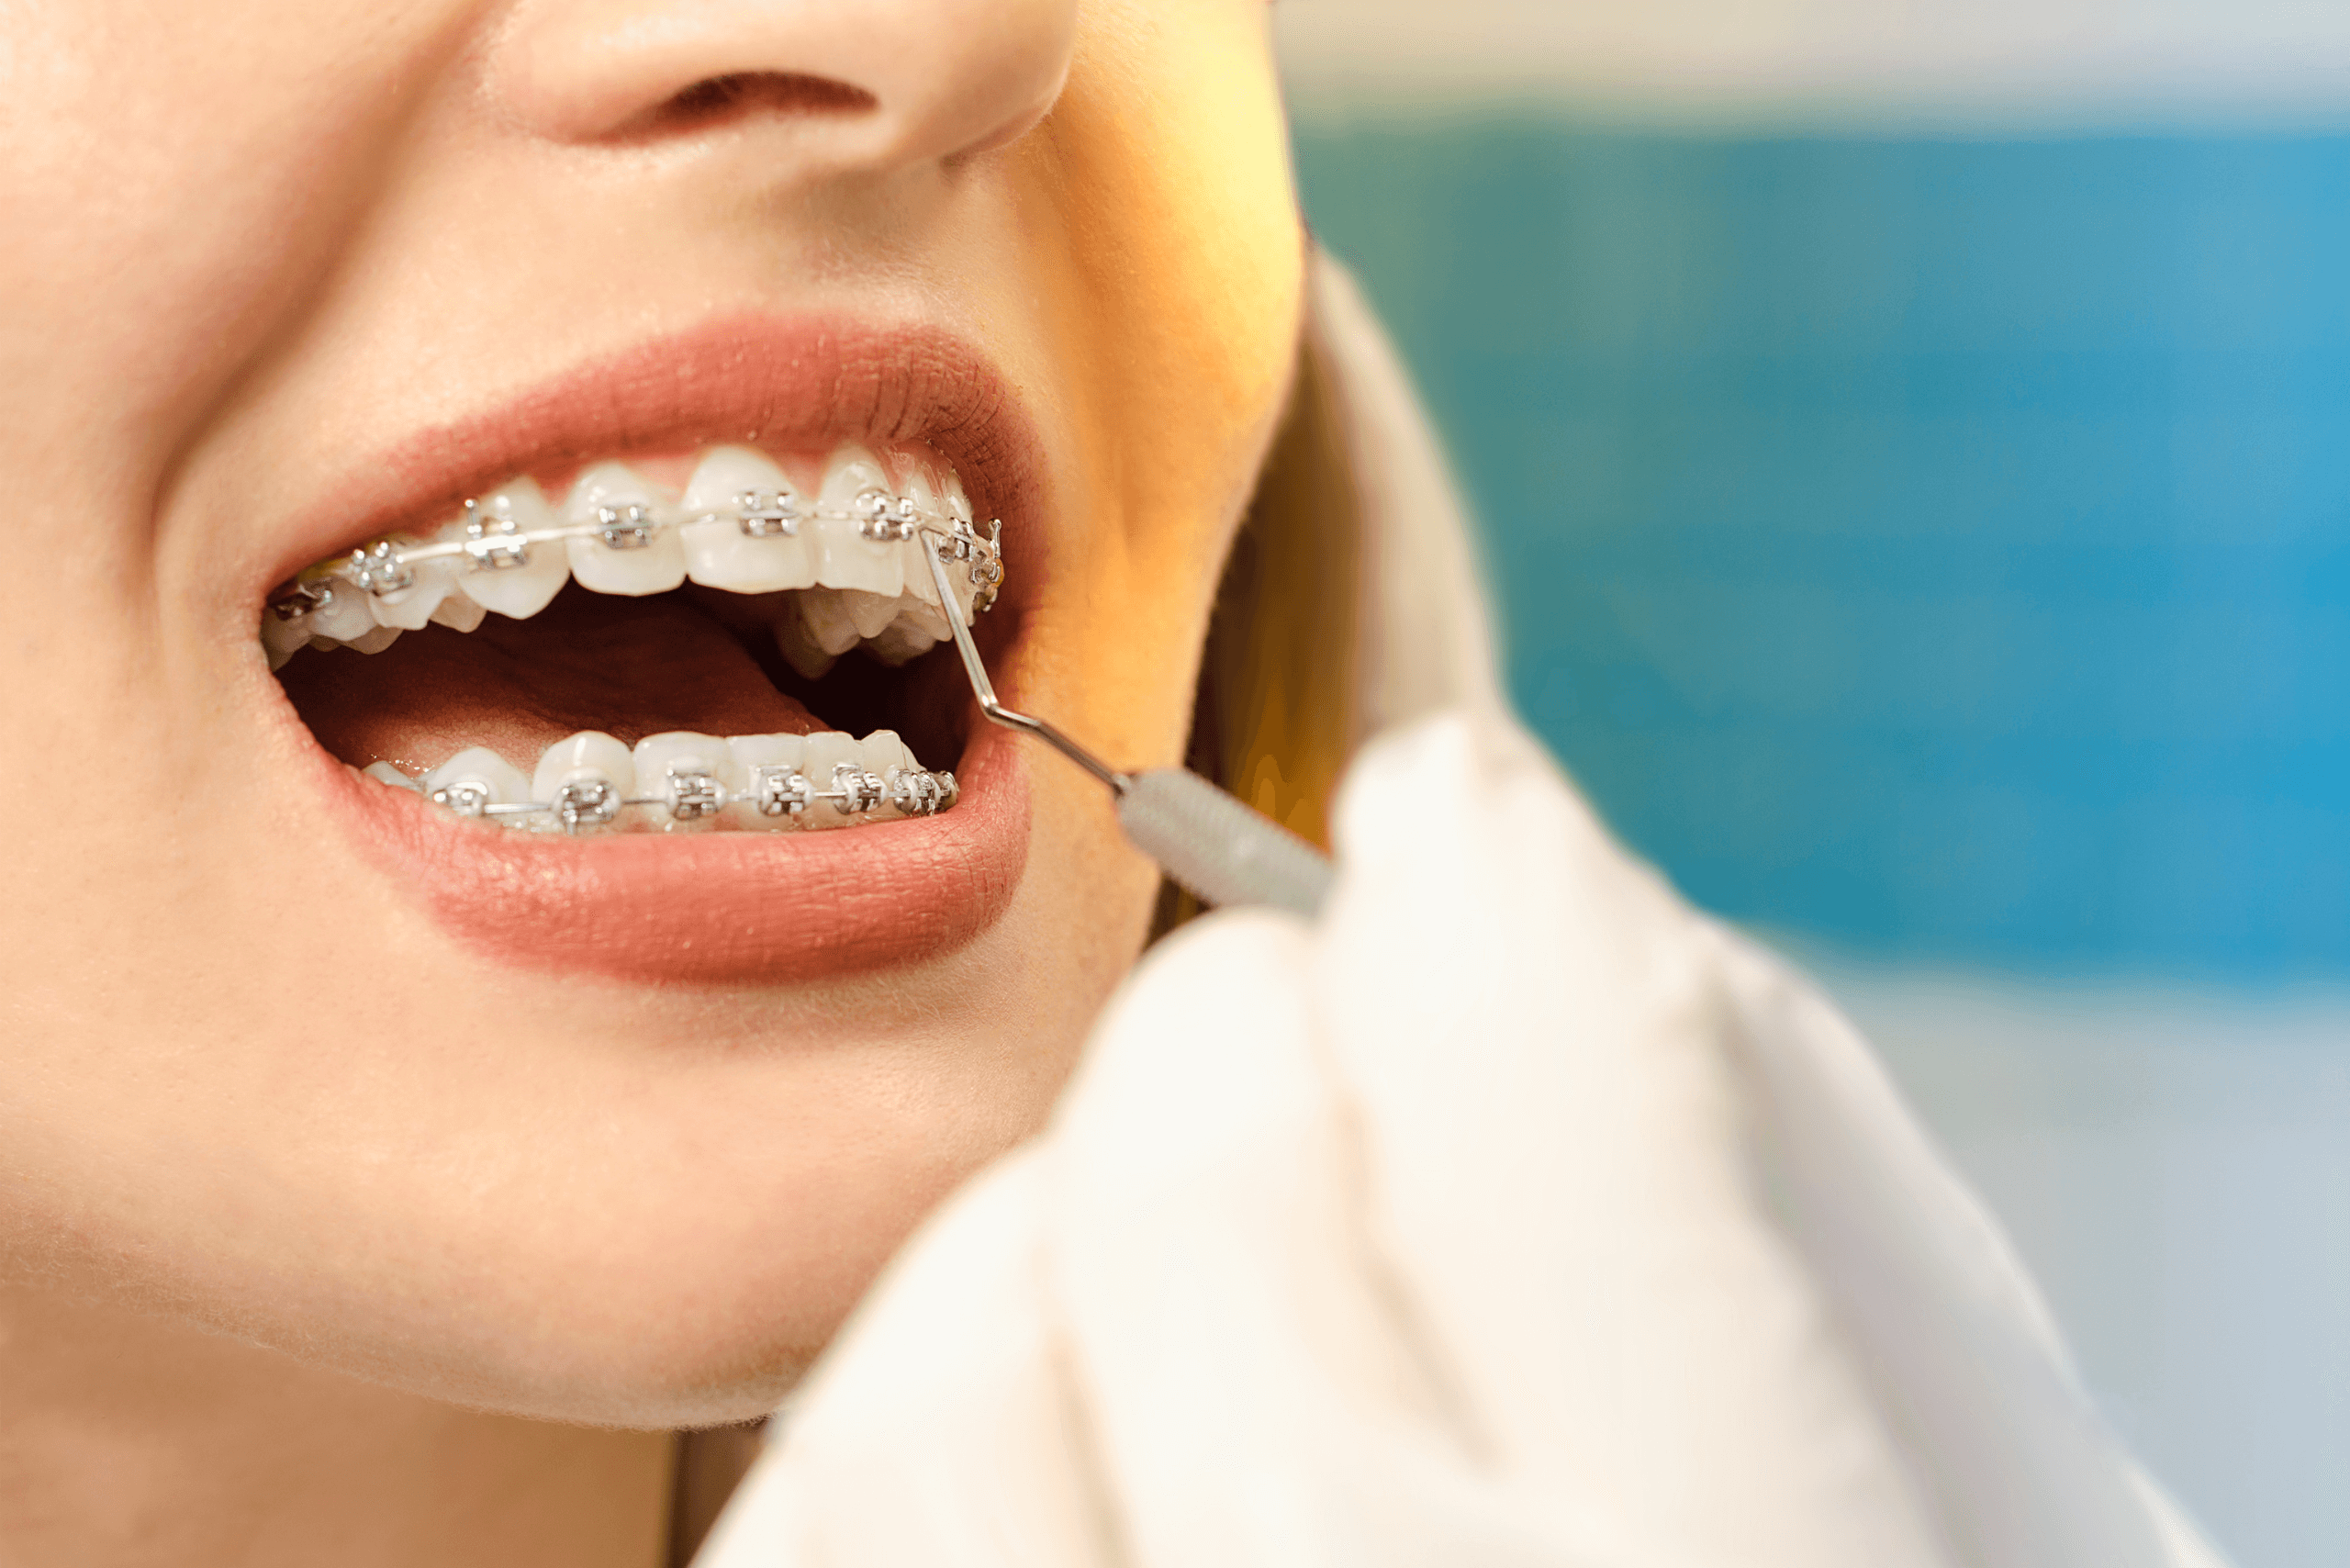 Close up of woman with braces receiving dental treatment by staff member in medical gloves